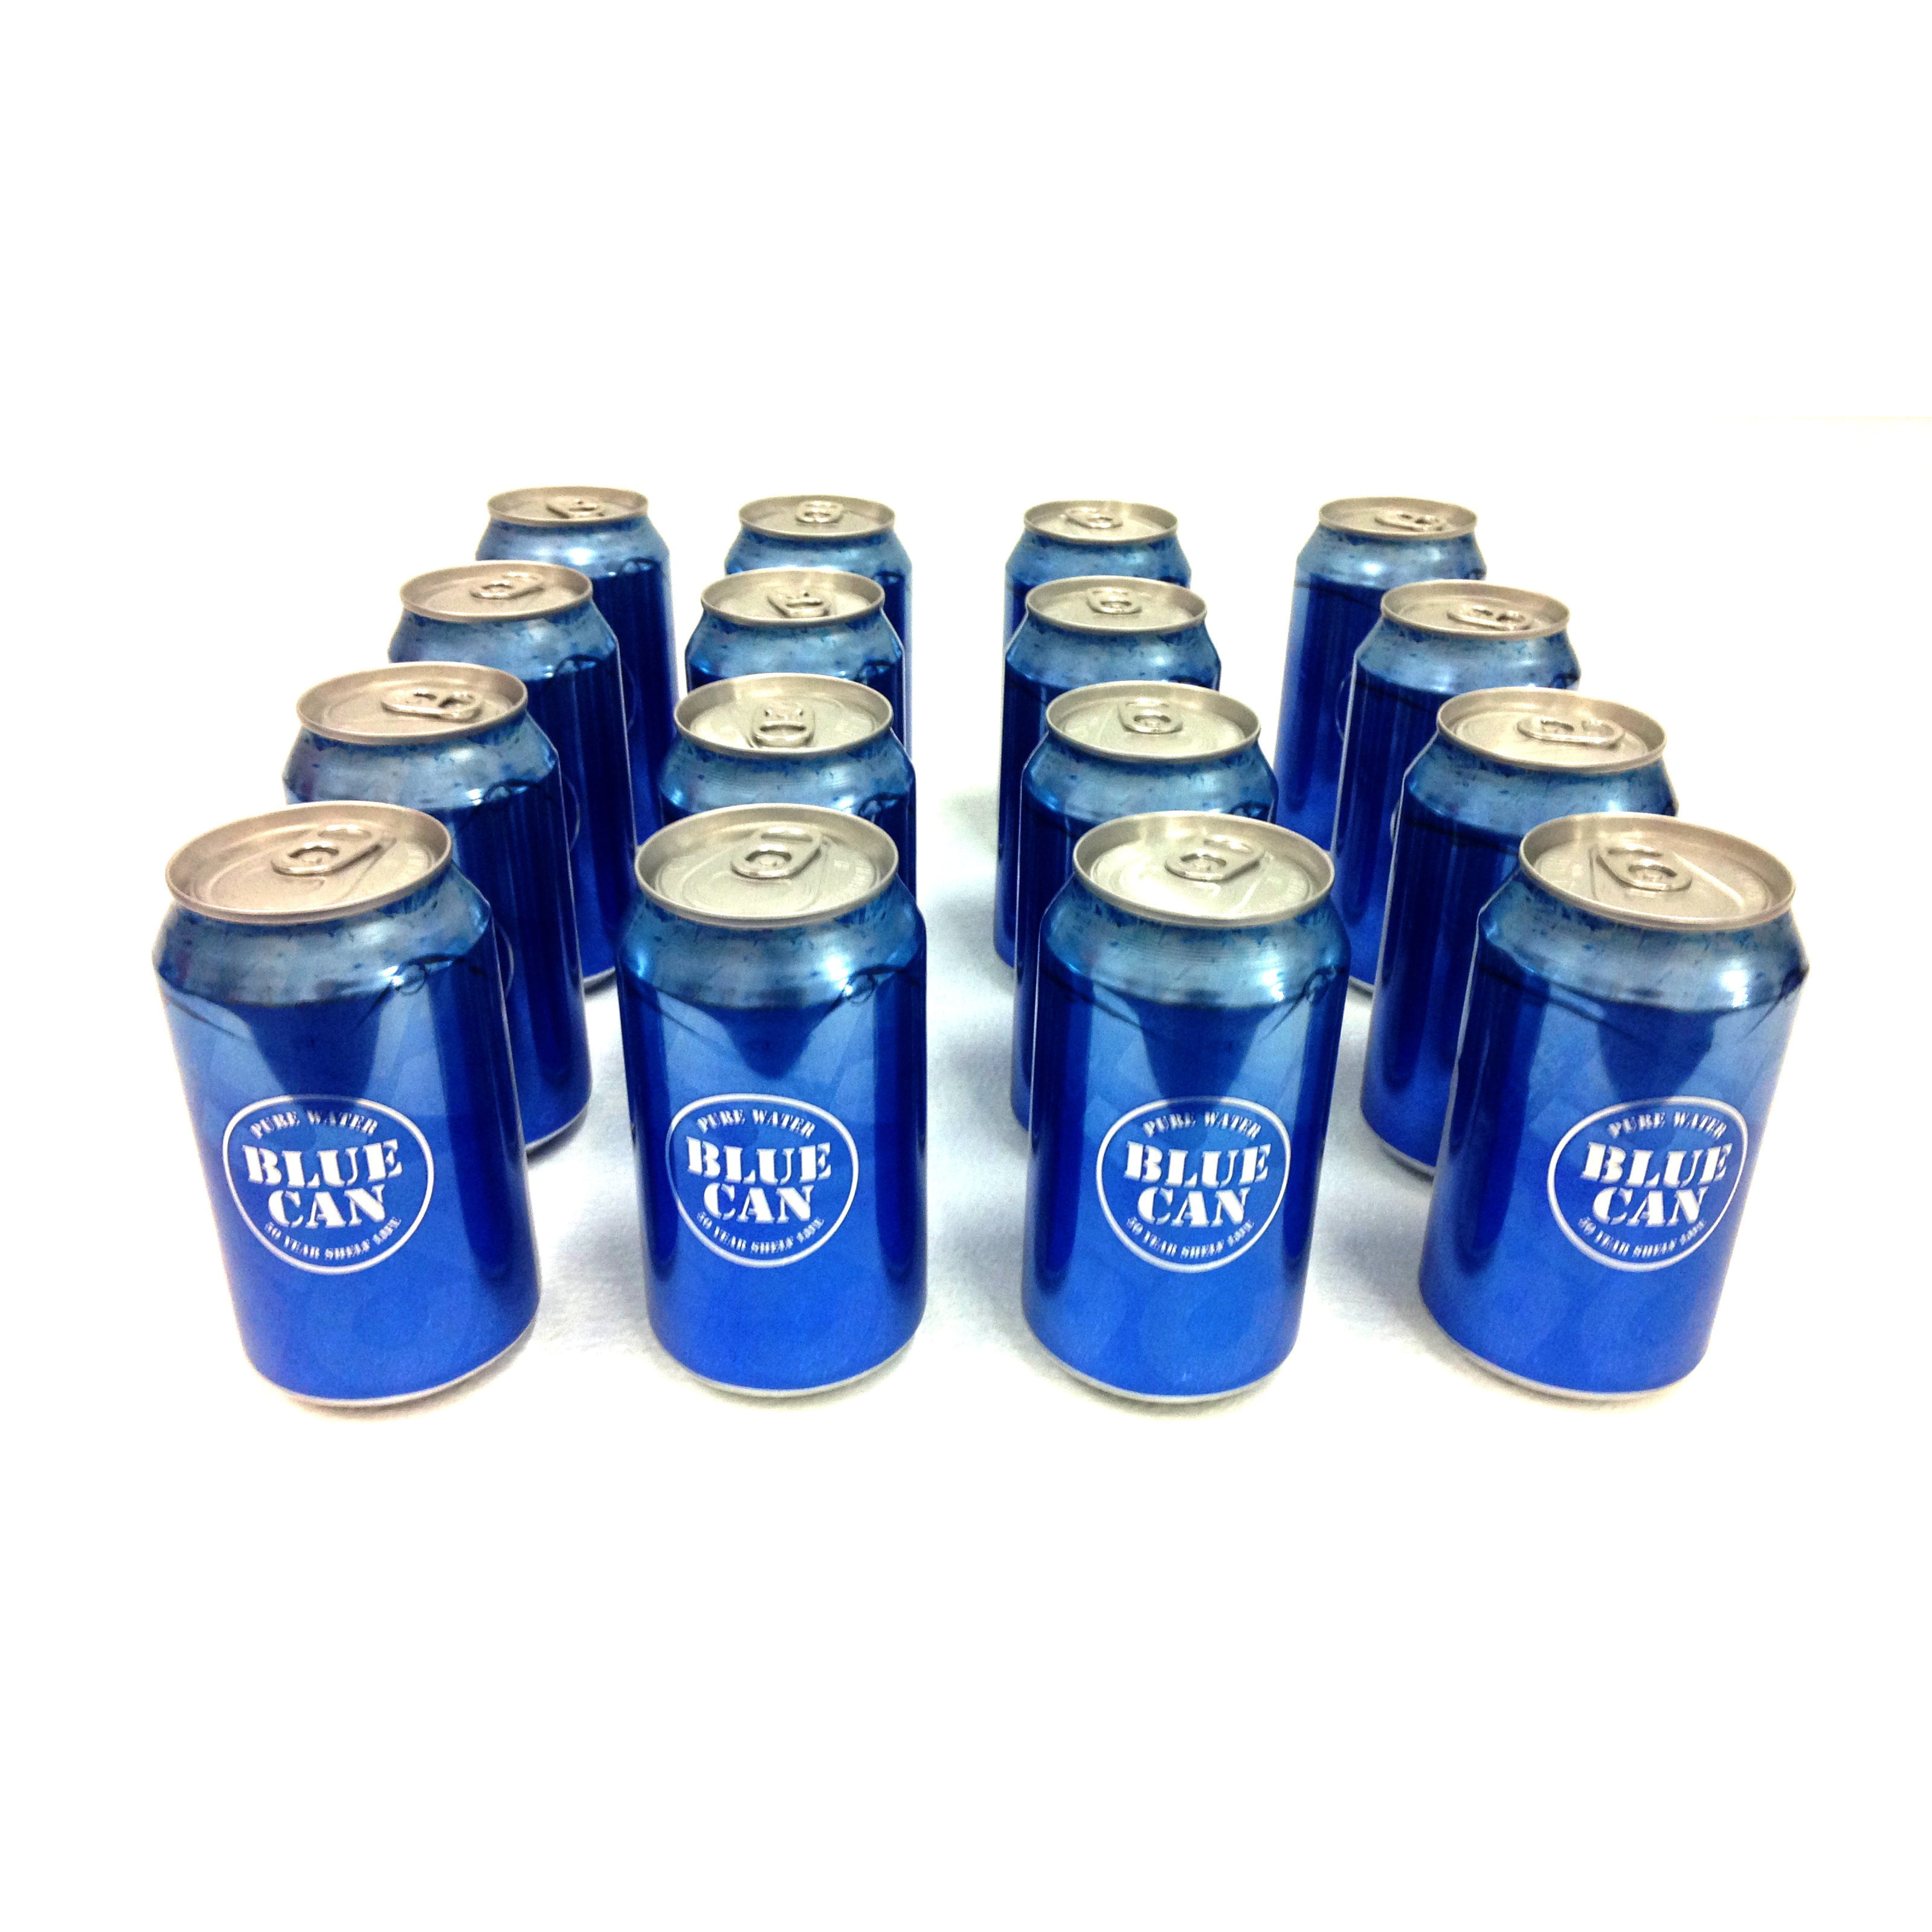 48-Pack of Blue Can Emergency Drinking Water